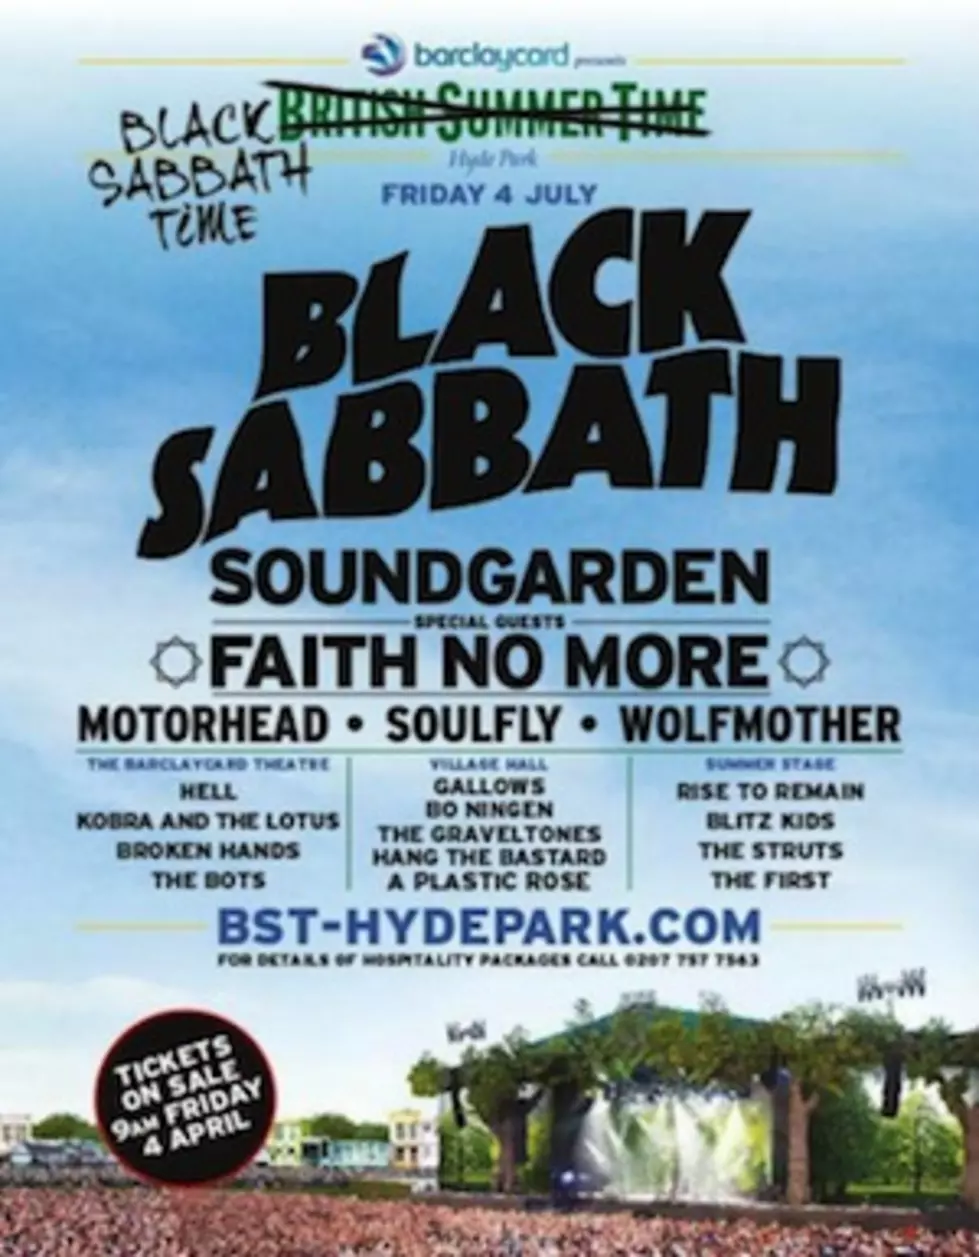 Tickets for Black Sabbath Show With Motorhead + Soundgarden Accidentally Sold for $4.25